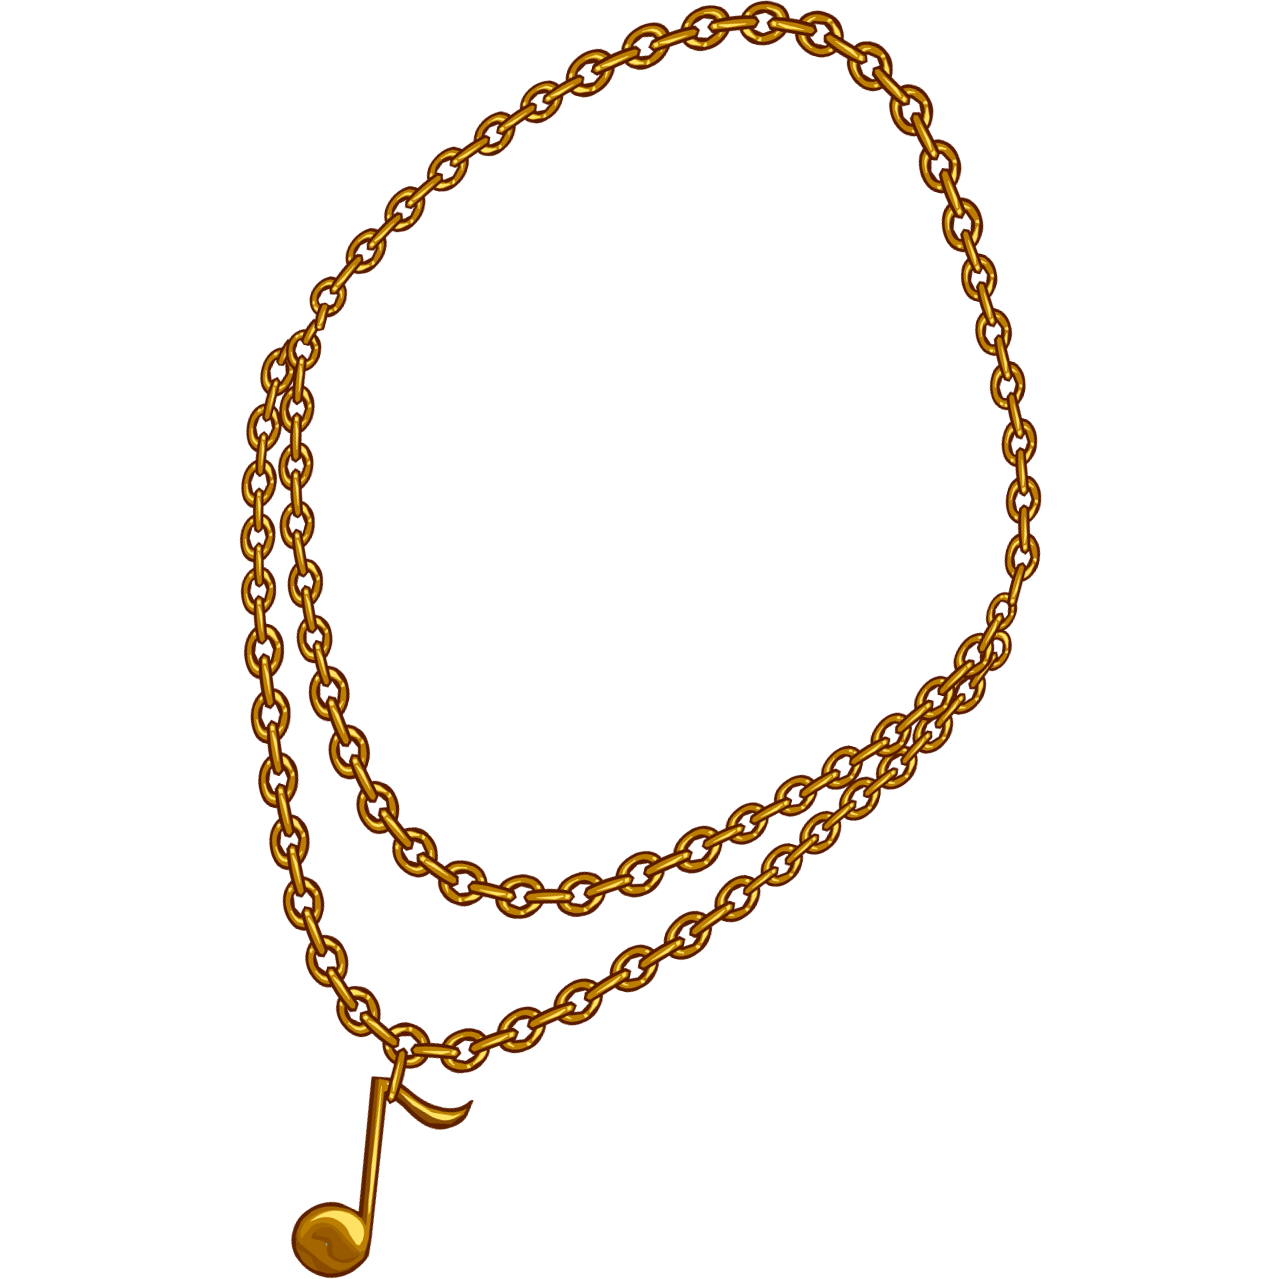 Jewelry clipart gold chain. Bronze music note necklace